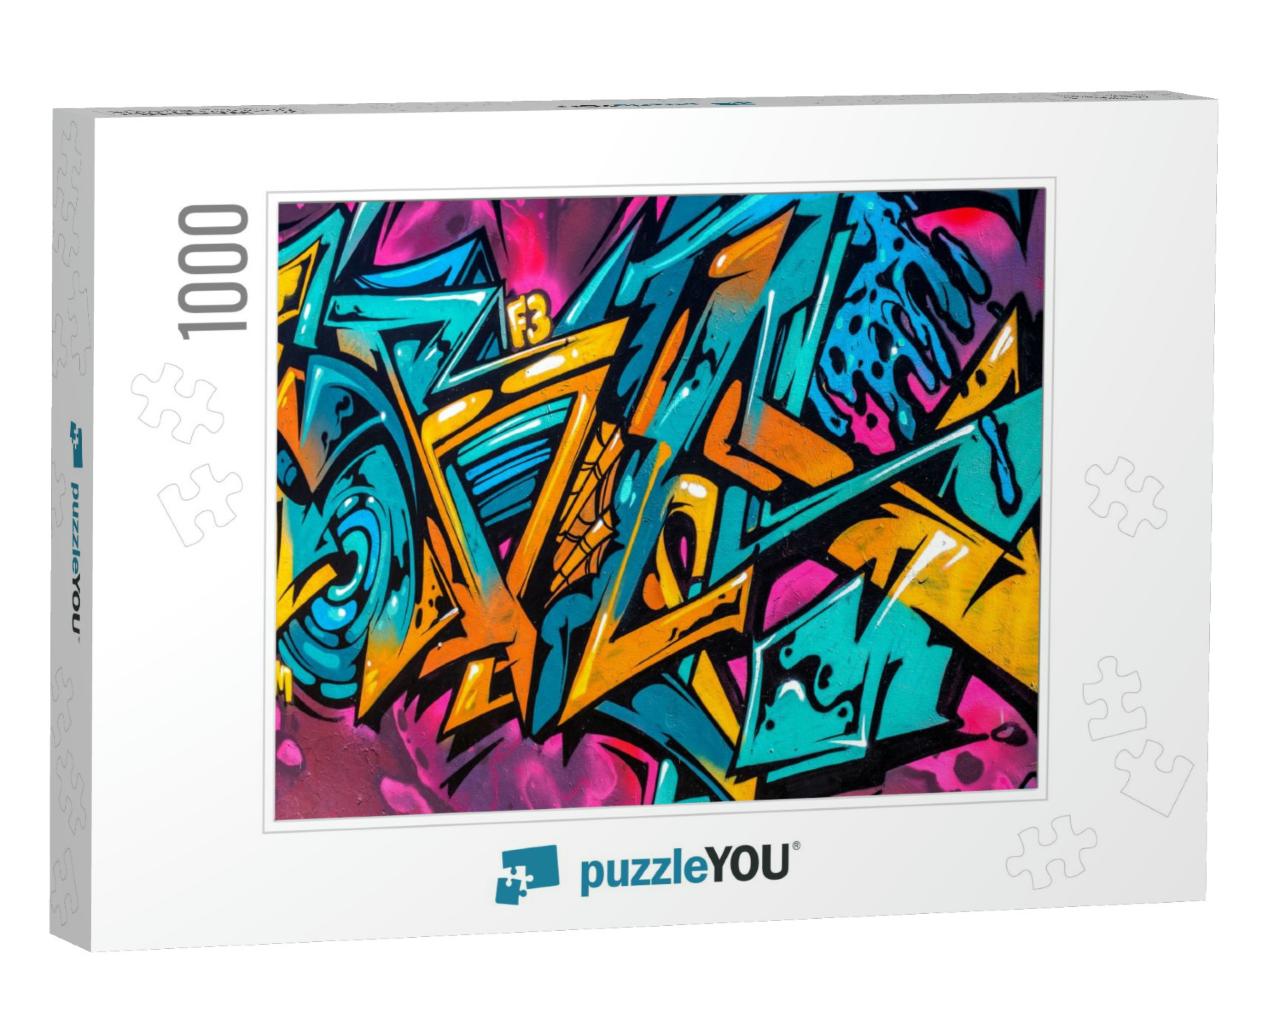 Beautiful Street Art of Graffiti. Abstract Color Creative... Jigsaw Puzzle with 1000 pieces